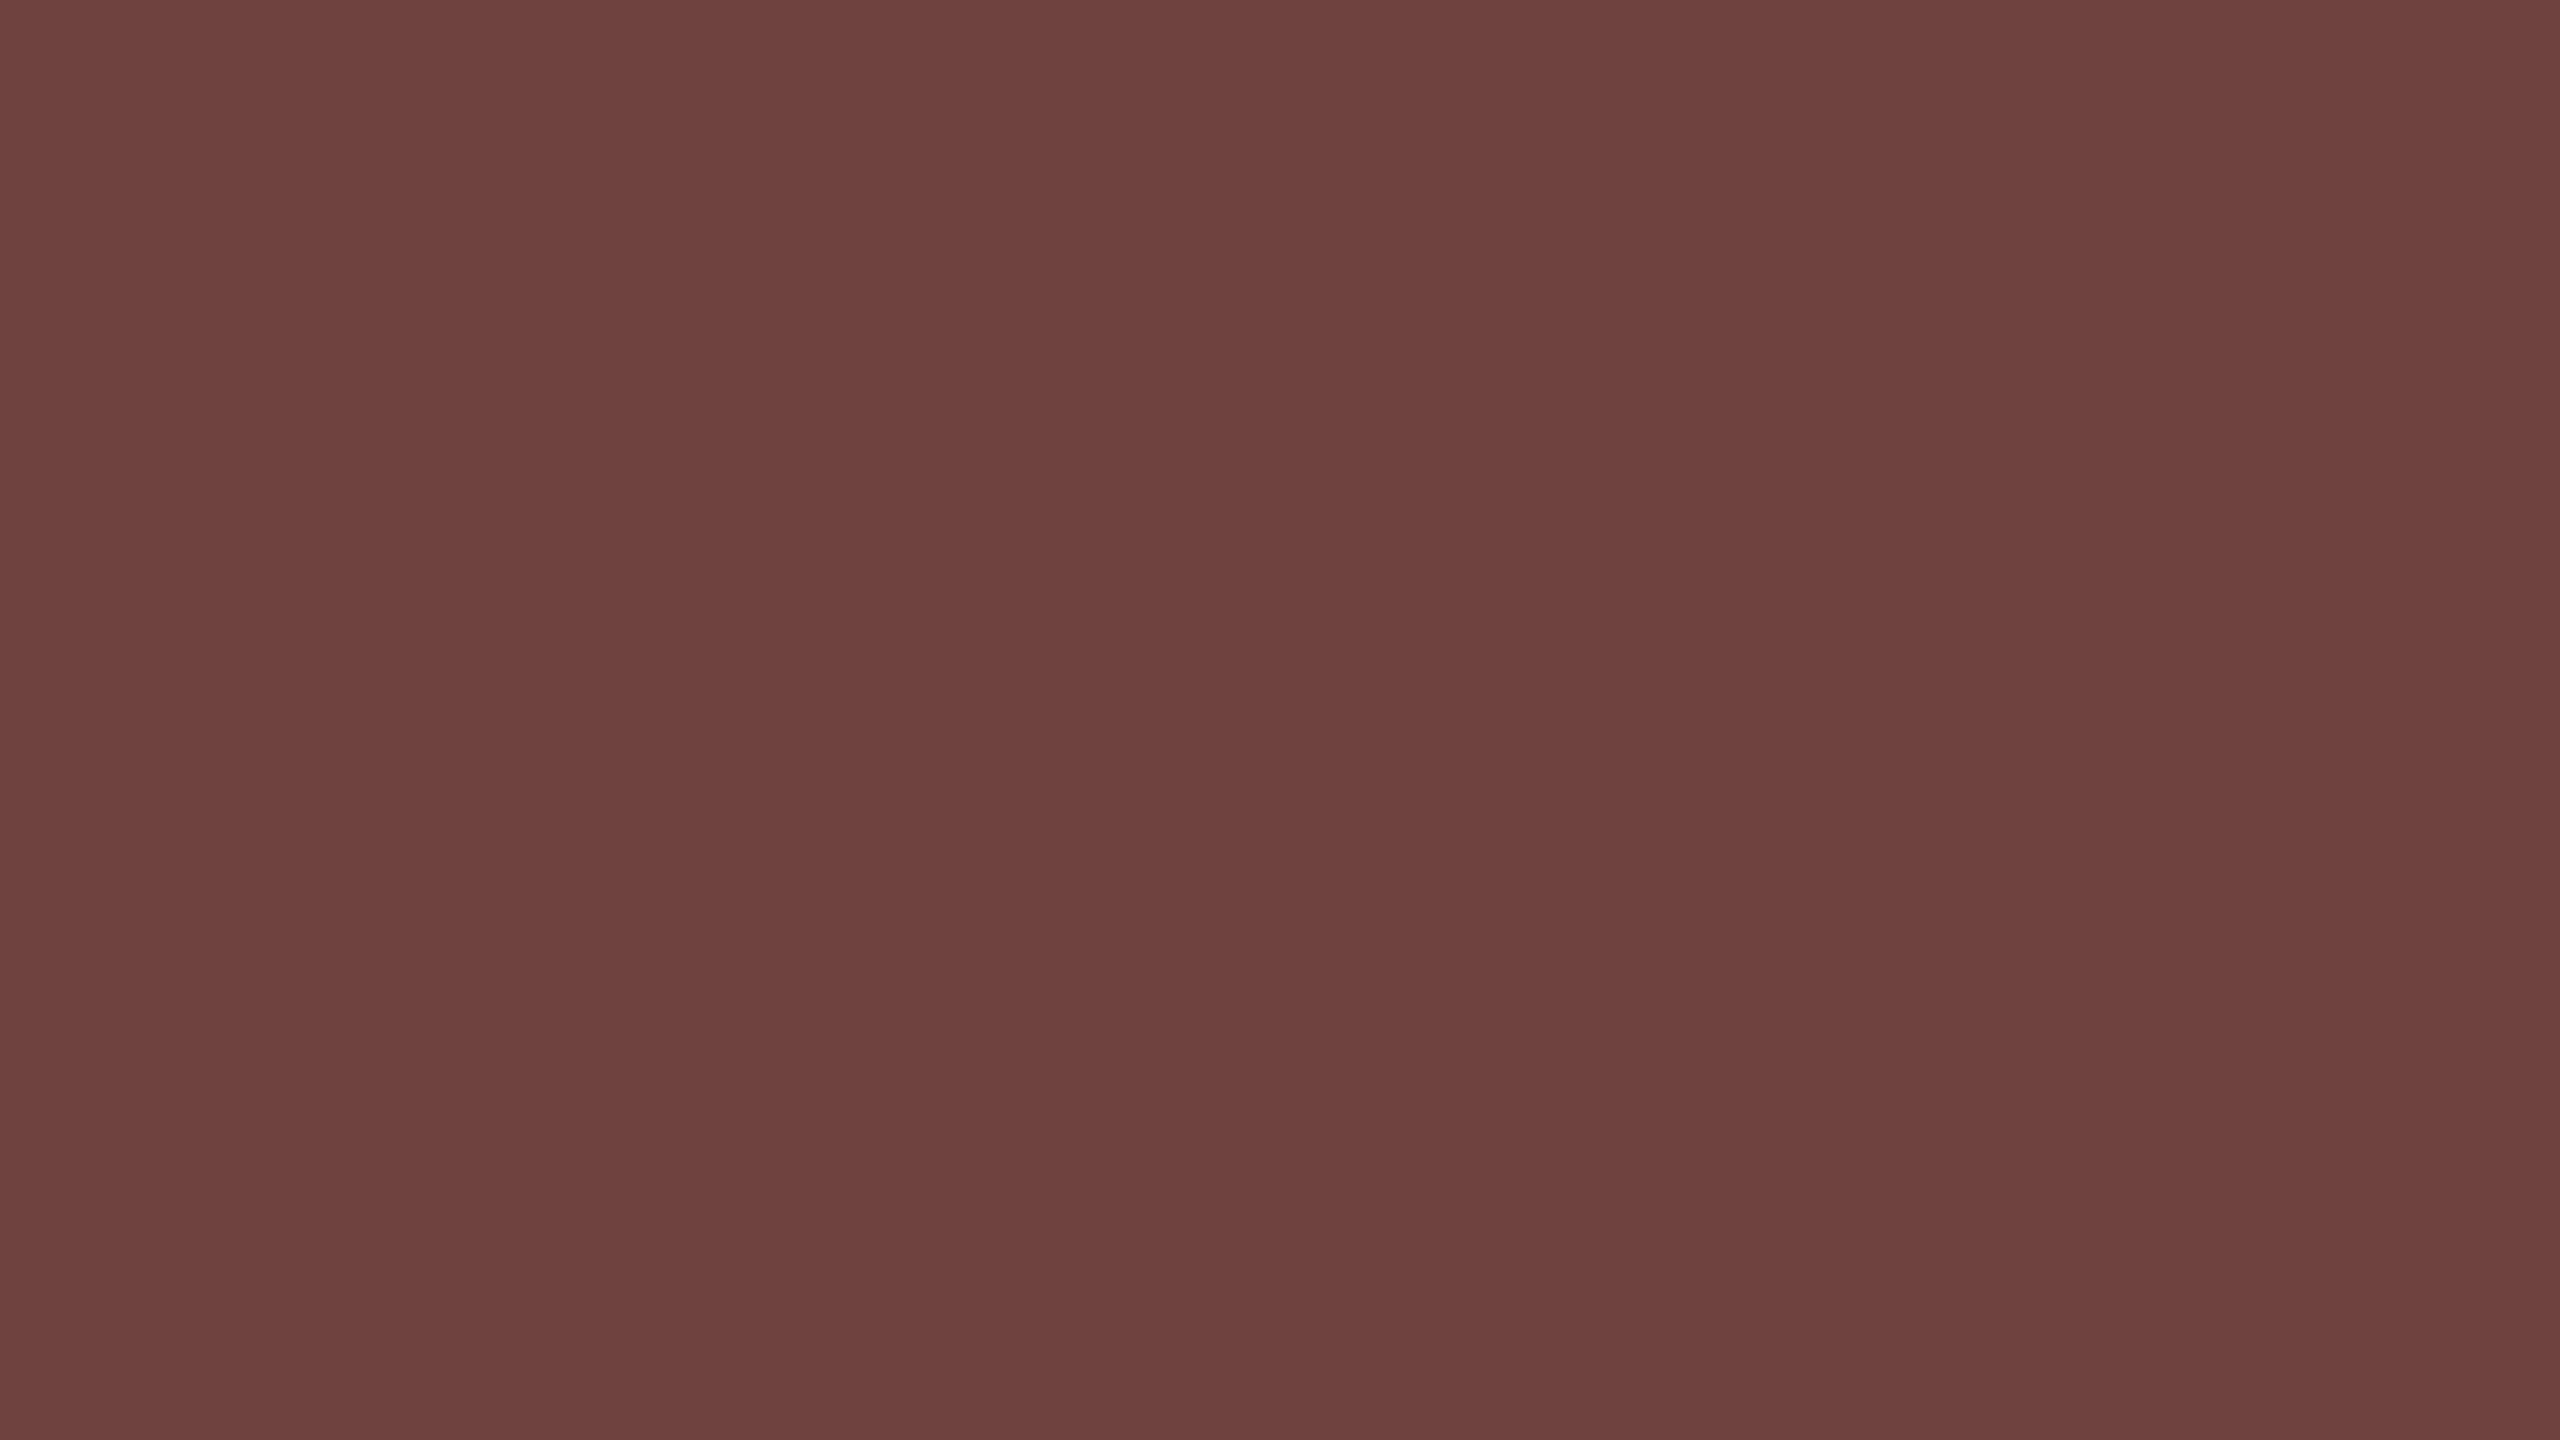 2560x1440 Deep Coffee Solid Color Background